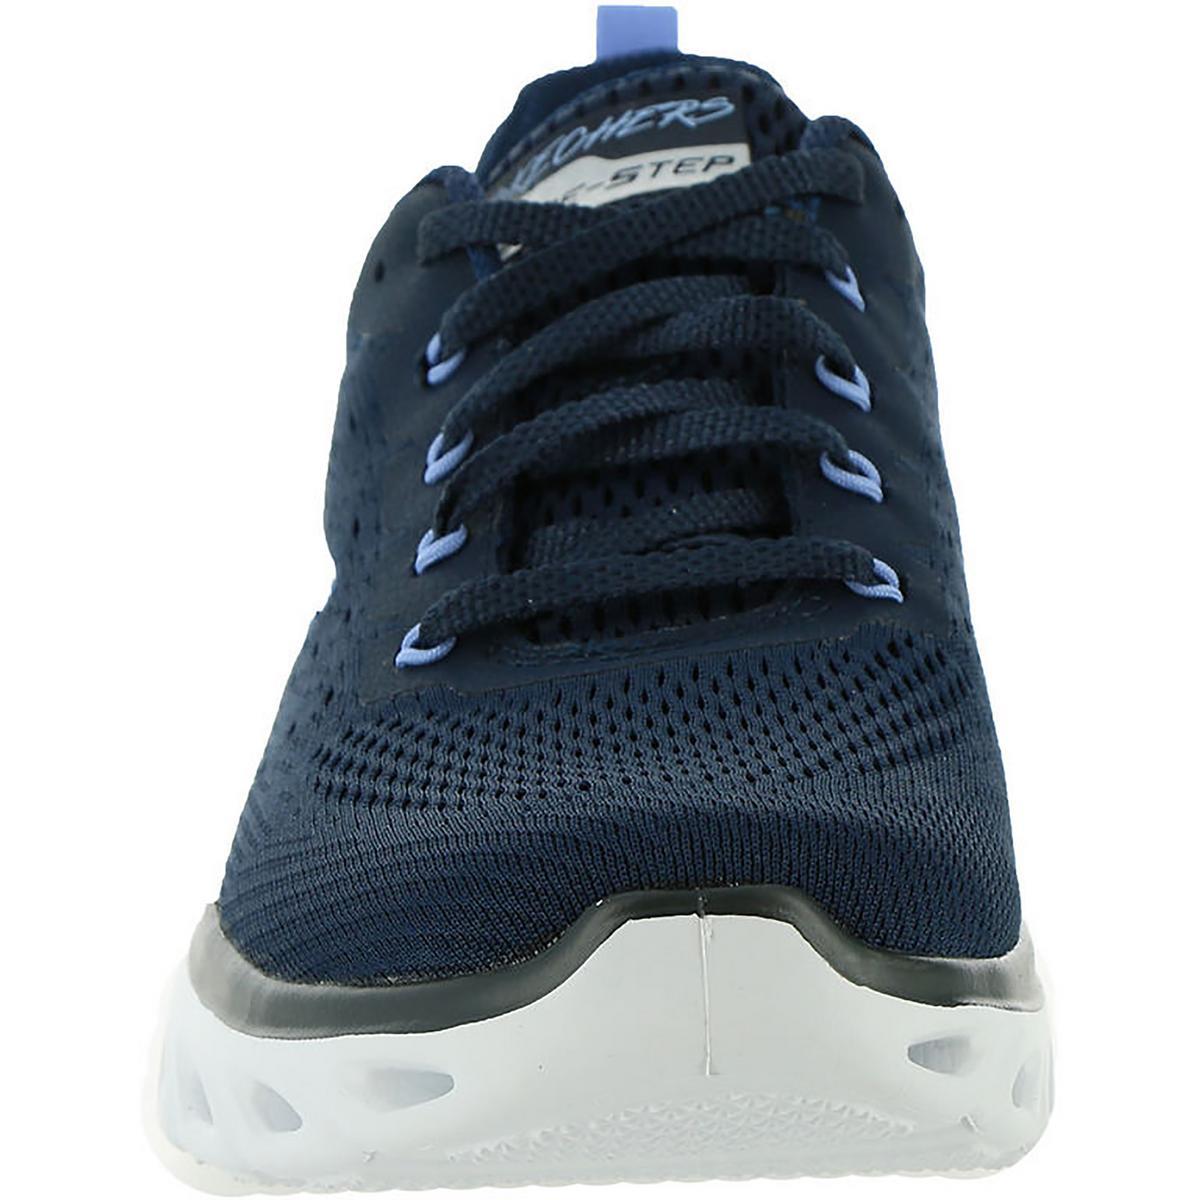 Skechers New Facets Womens Facets Gym Athletic and Training Shoes Sneakers Bhfo 3275 Navy